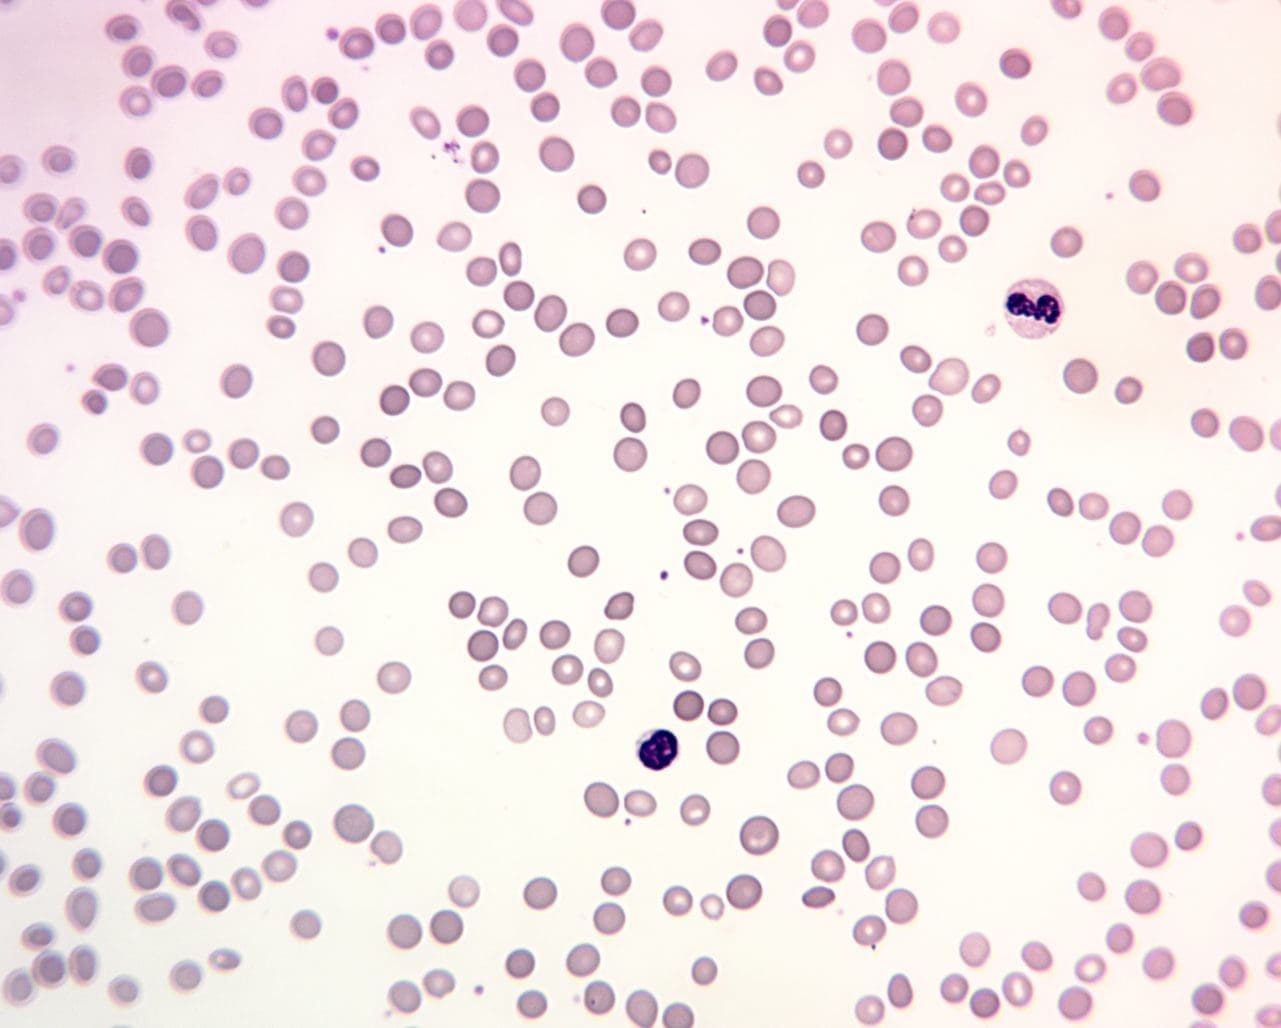 Image displaying a peripheral blood smear of hereditary spherocytosis, showcasing the presence of numerous spherocytes, characterized by their small size, dense staining, and lack of central pallor